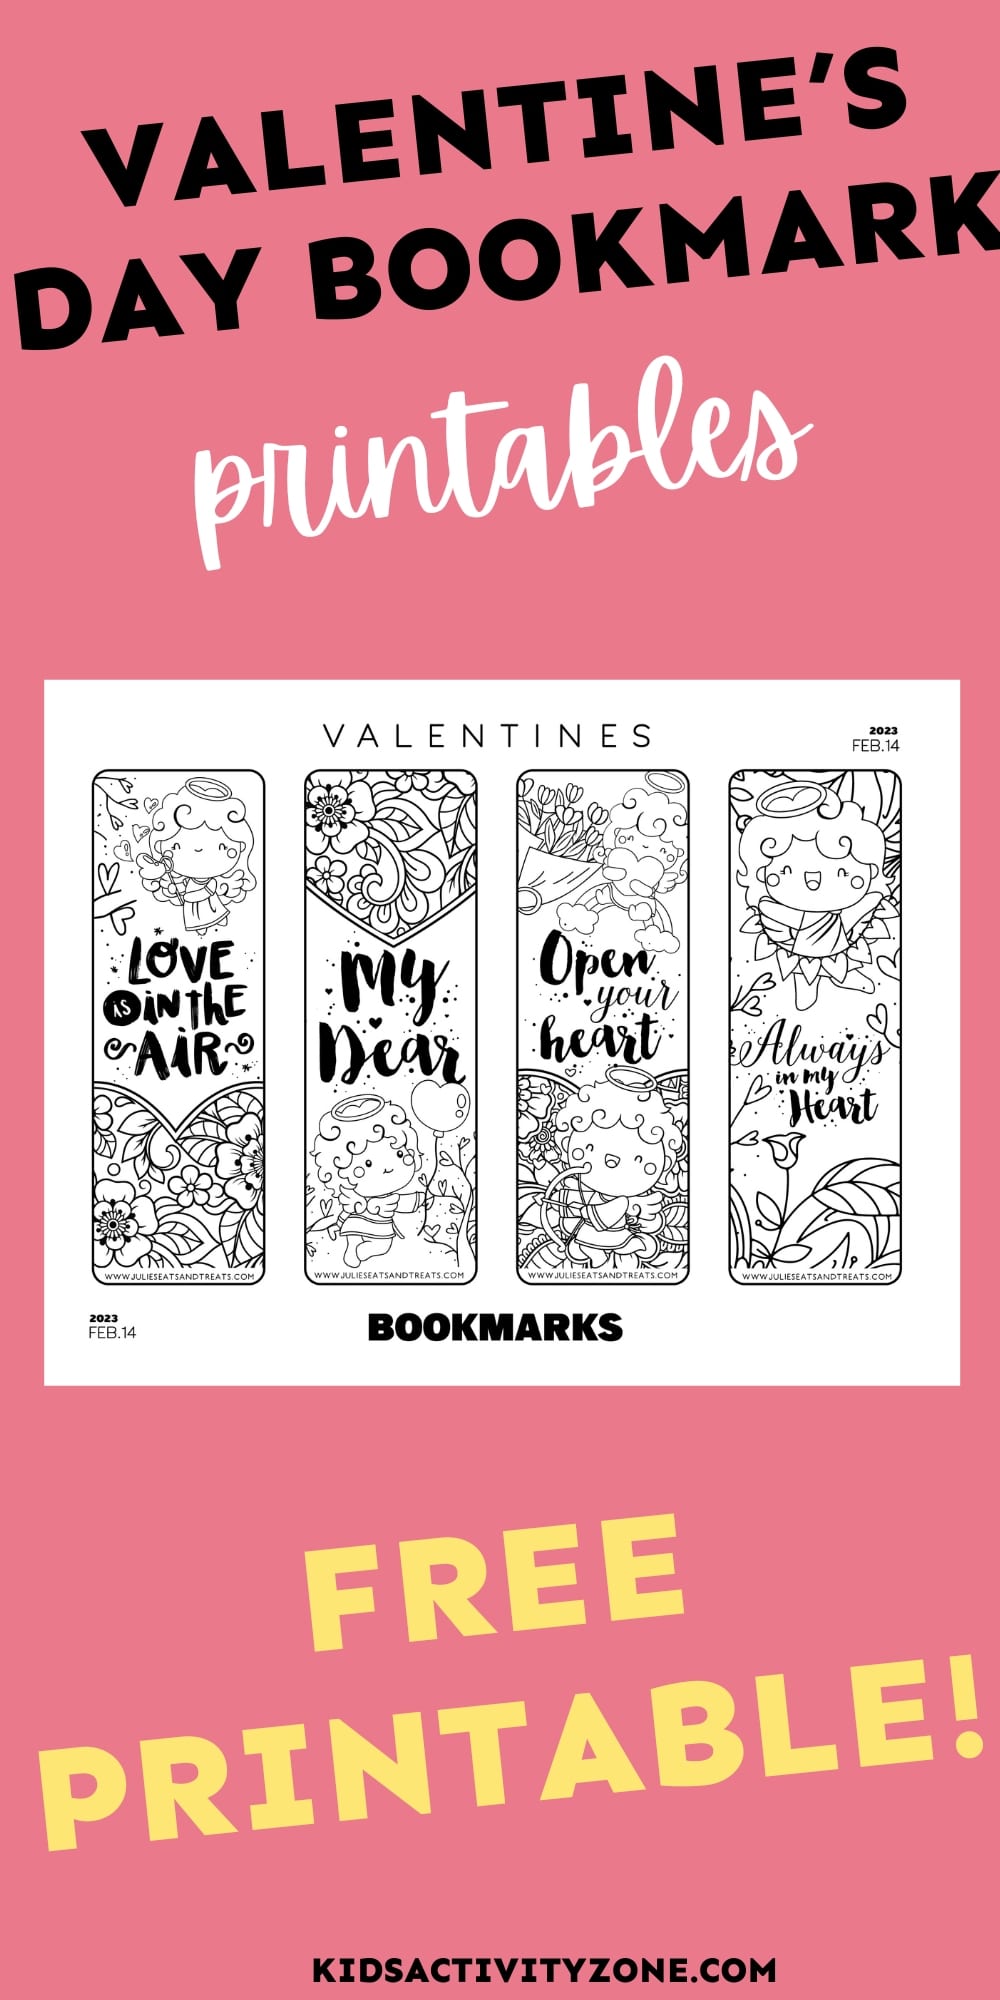 Check out these adorable and totally free Valentine's Day Bookmark printables! They're a fun and easy activity for the kids this winter. Just print 'em out, let the kiddos color them in, and they've got cool bookmarks for their reading time. Plus, they make a sweet homemade gift for Valentine's Day or a neat project for the classroom!